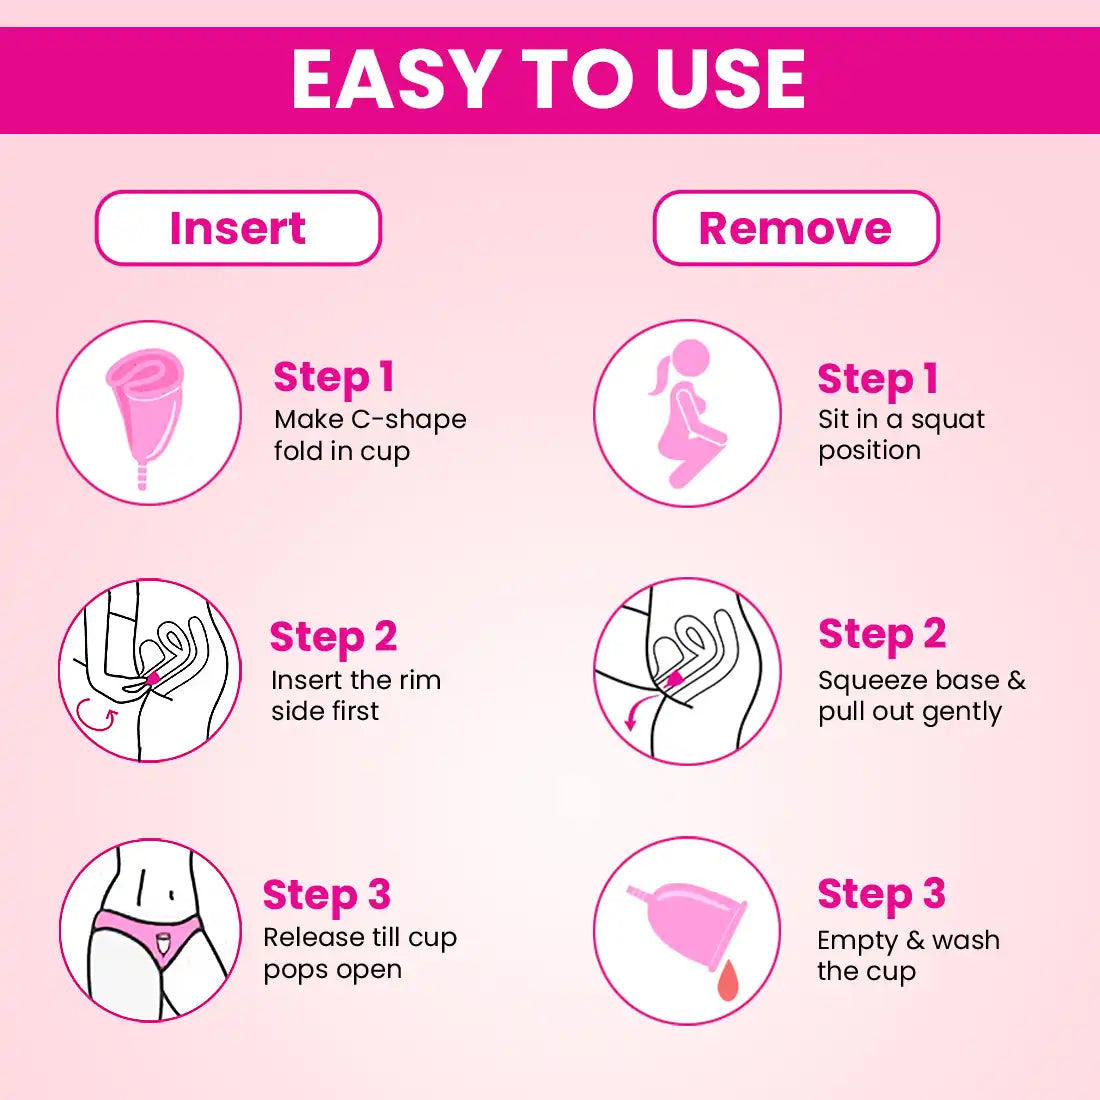 everteen Menstrual Cup for Periods - Odor-Free, Rash-Free, No Leakage, 12-Hour Protection, Reusable For Up To 10 Years, Medical-Grade Silicone, Free Pouch - Sanitary Cup for Feminine Hygiene